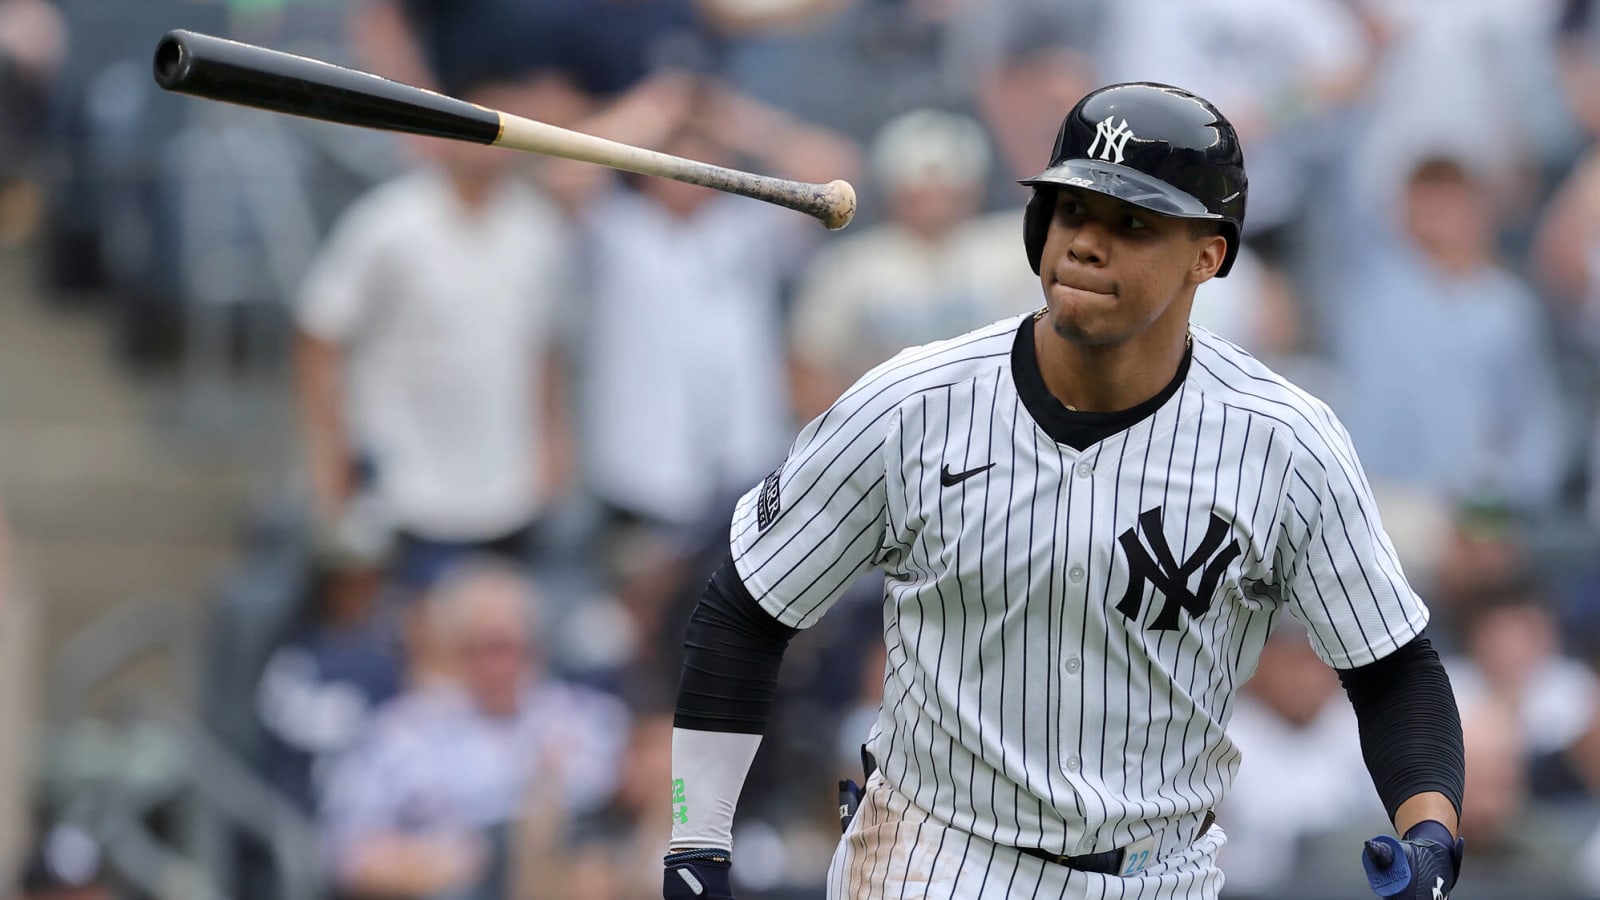 The Yankees have a three-headed monster forming in the batting order